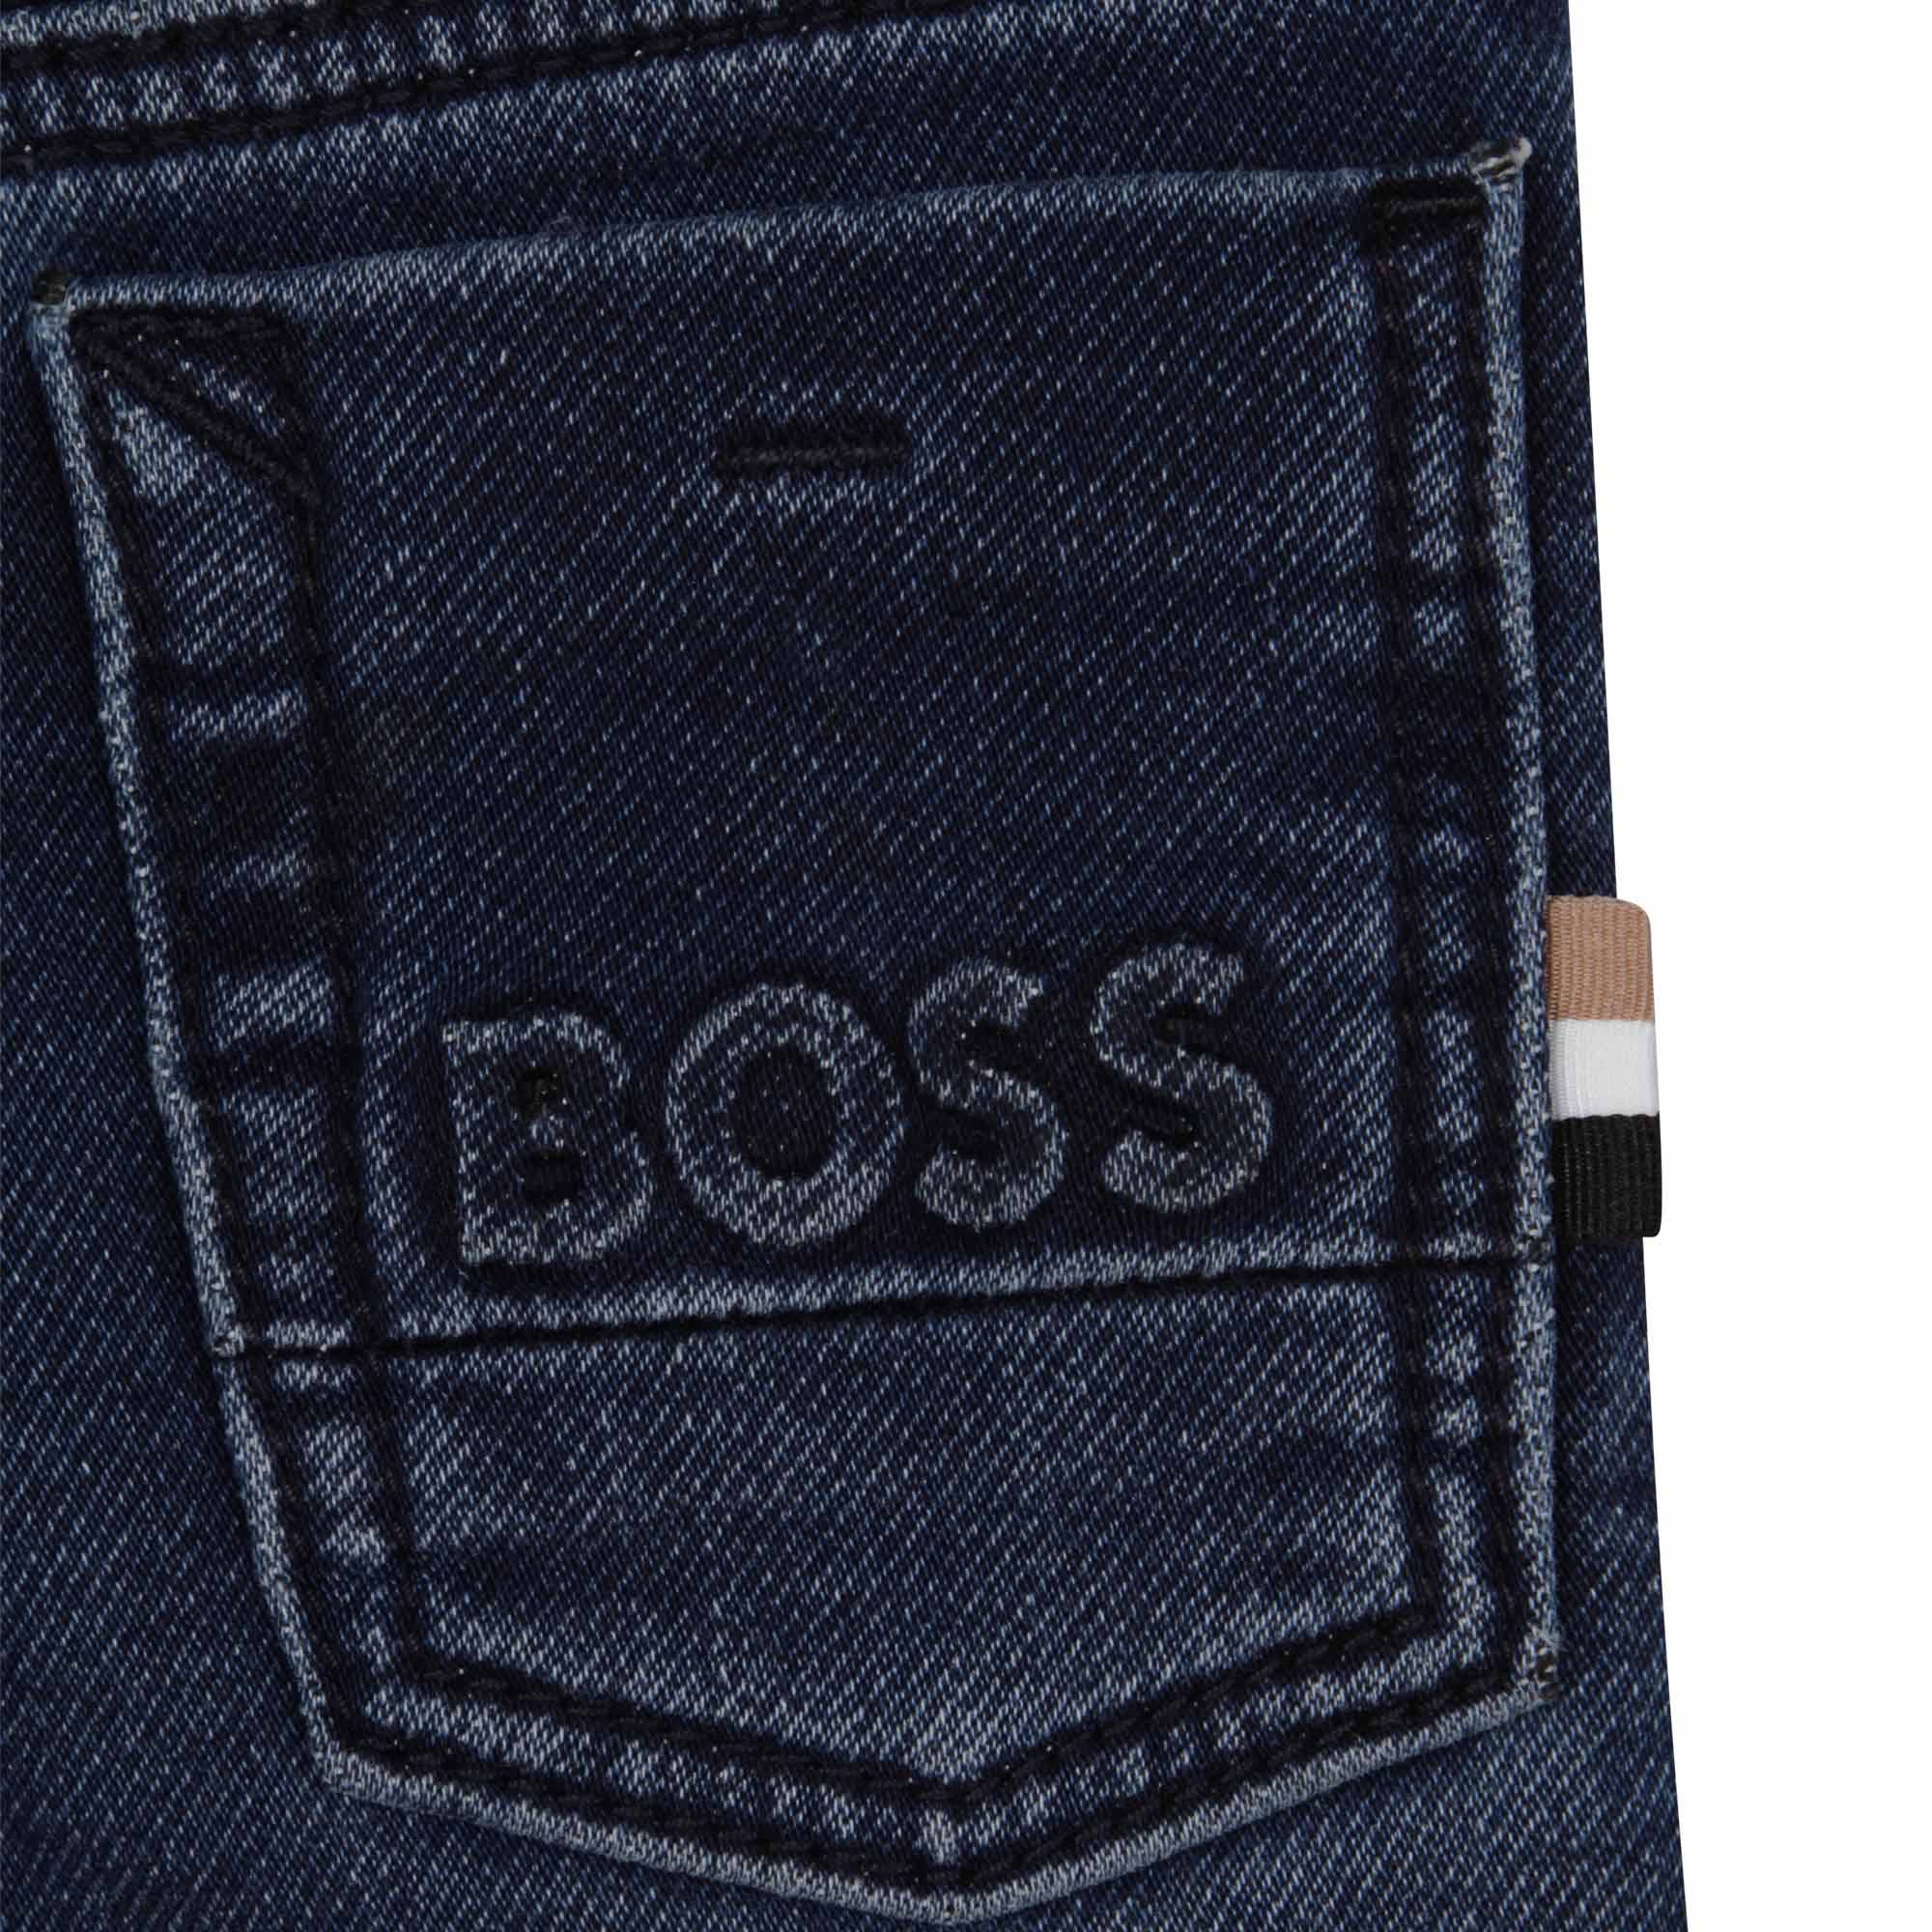 Roll-up 5-pocket jeans BOSS for BOY